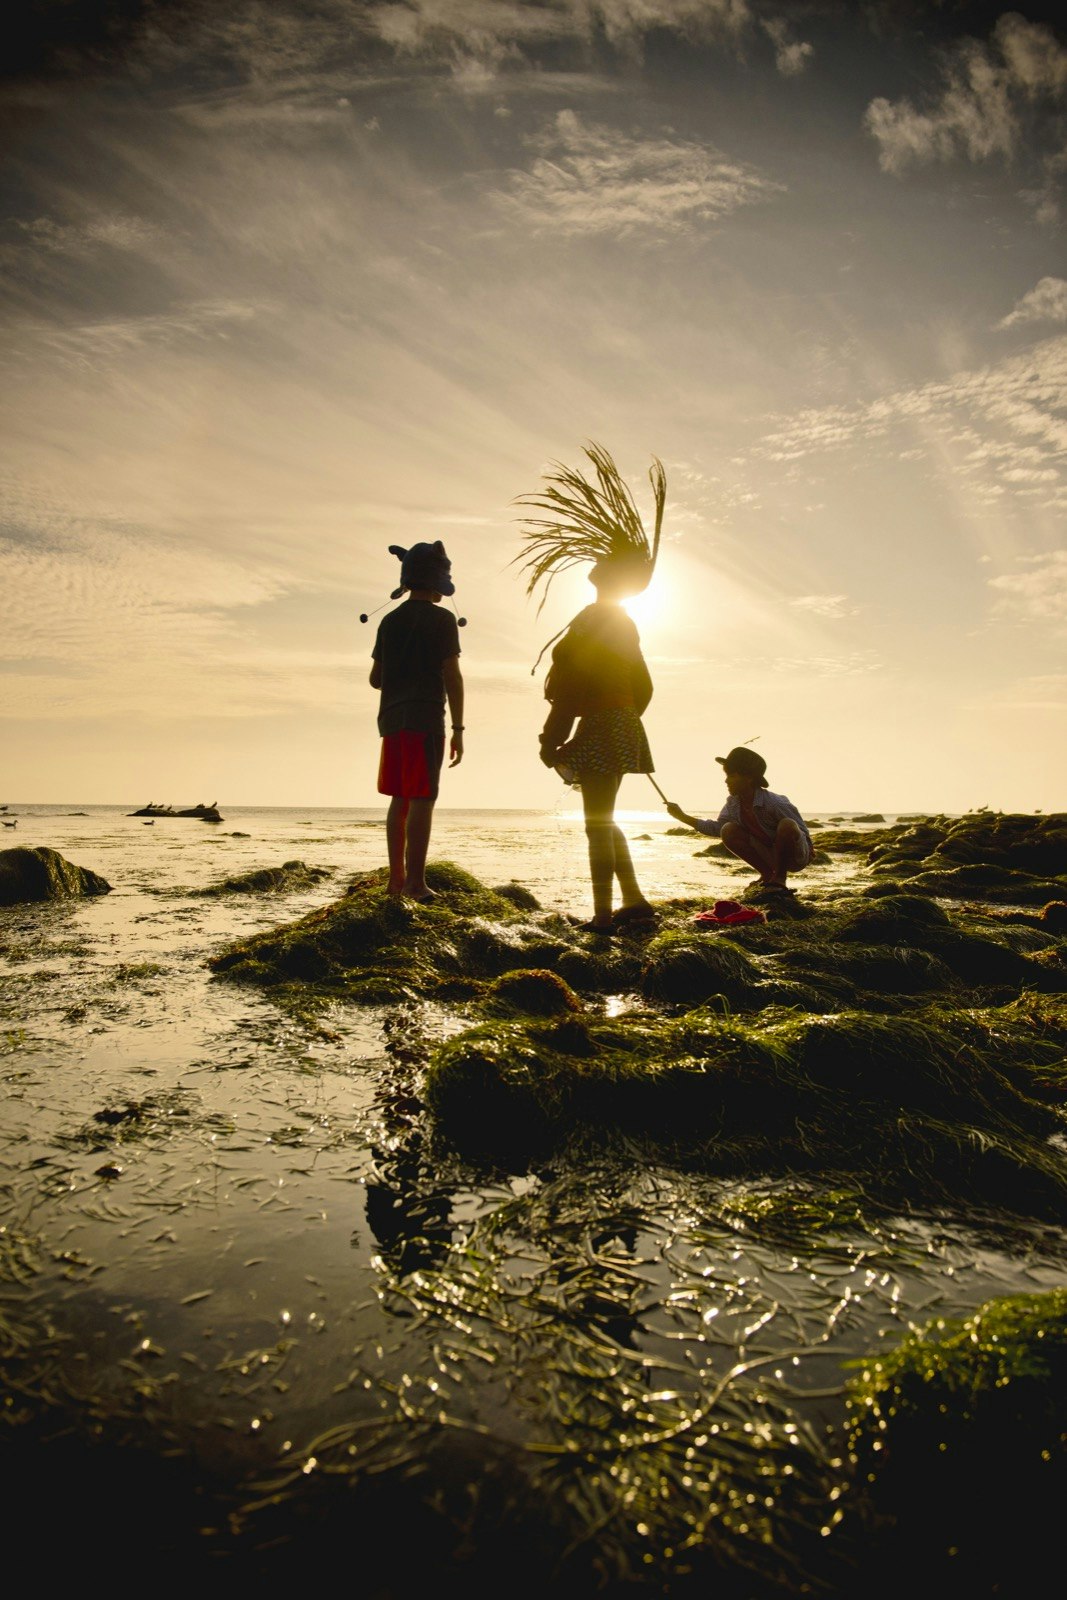 Kids jumping around at sunset in the tide pools in La Jolla, California